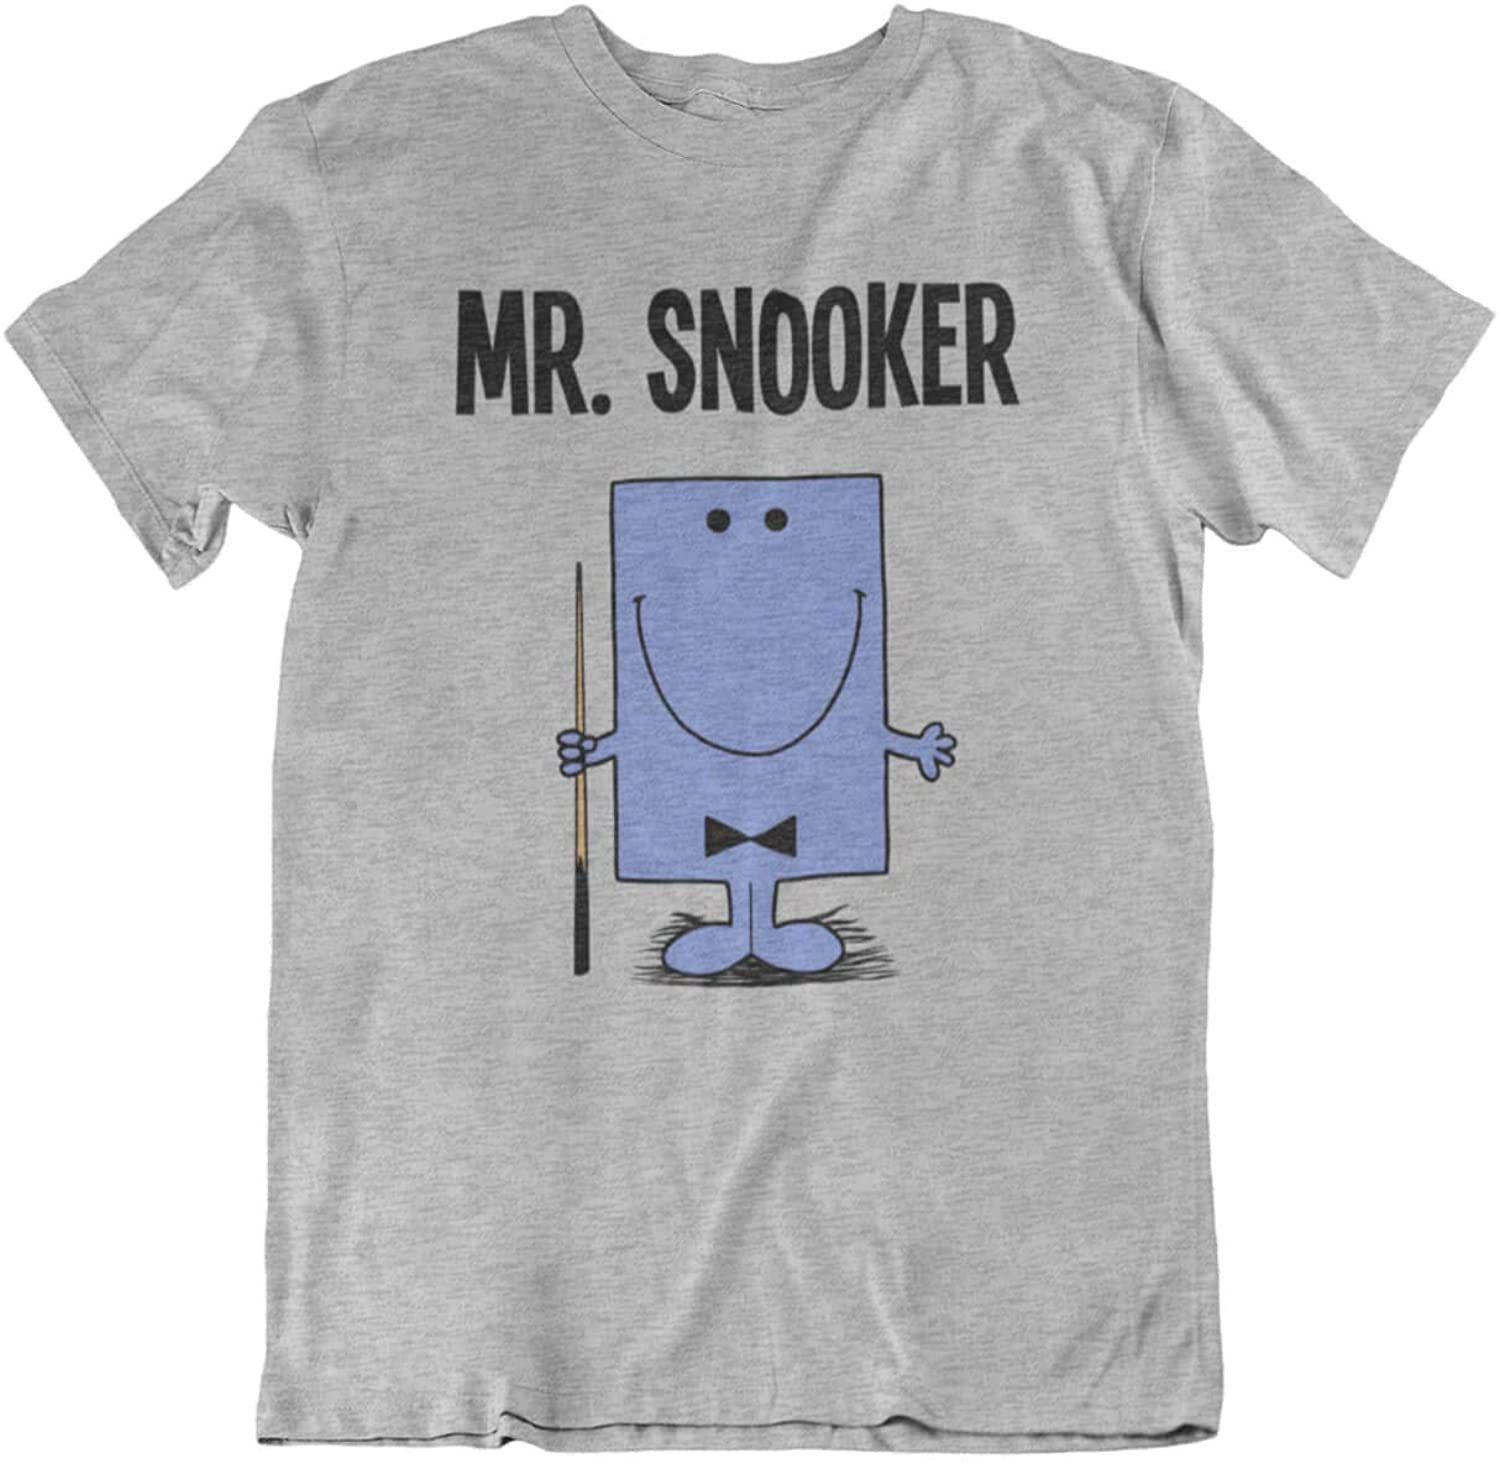 Mr Snooker - Mens Organic Cotton T-Shirt Sustainable Gift For Him